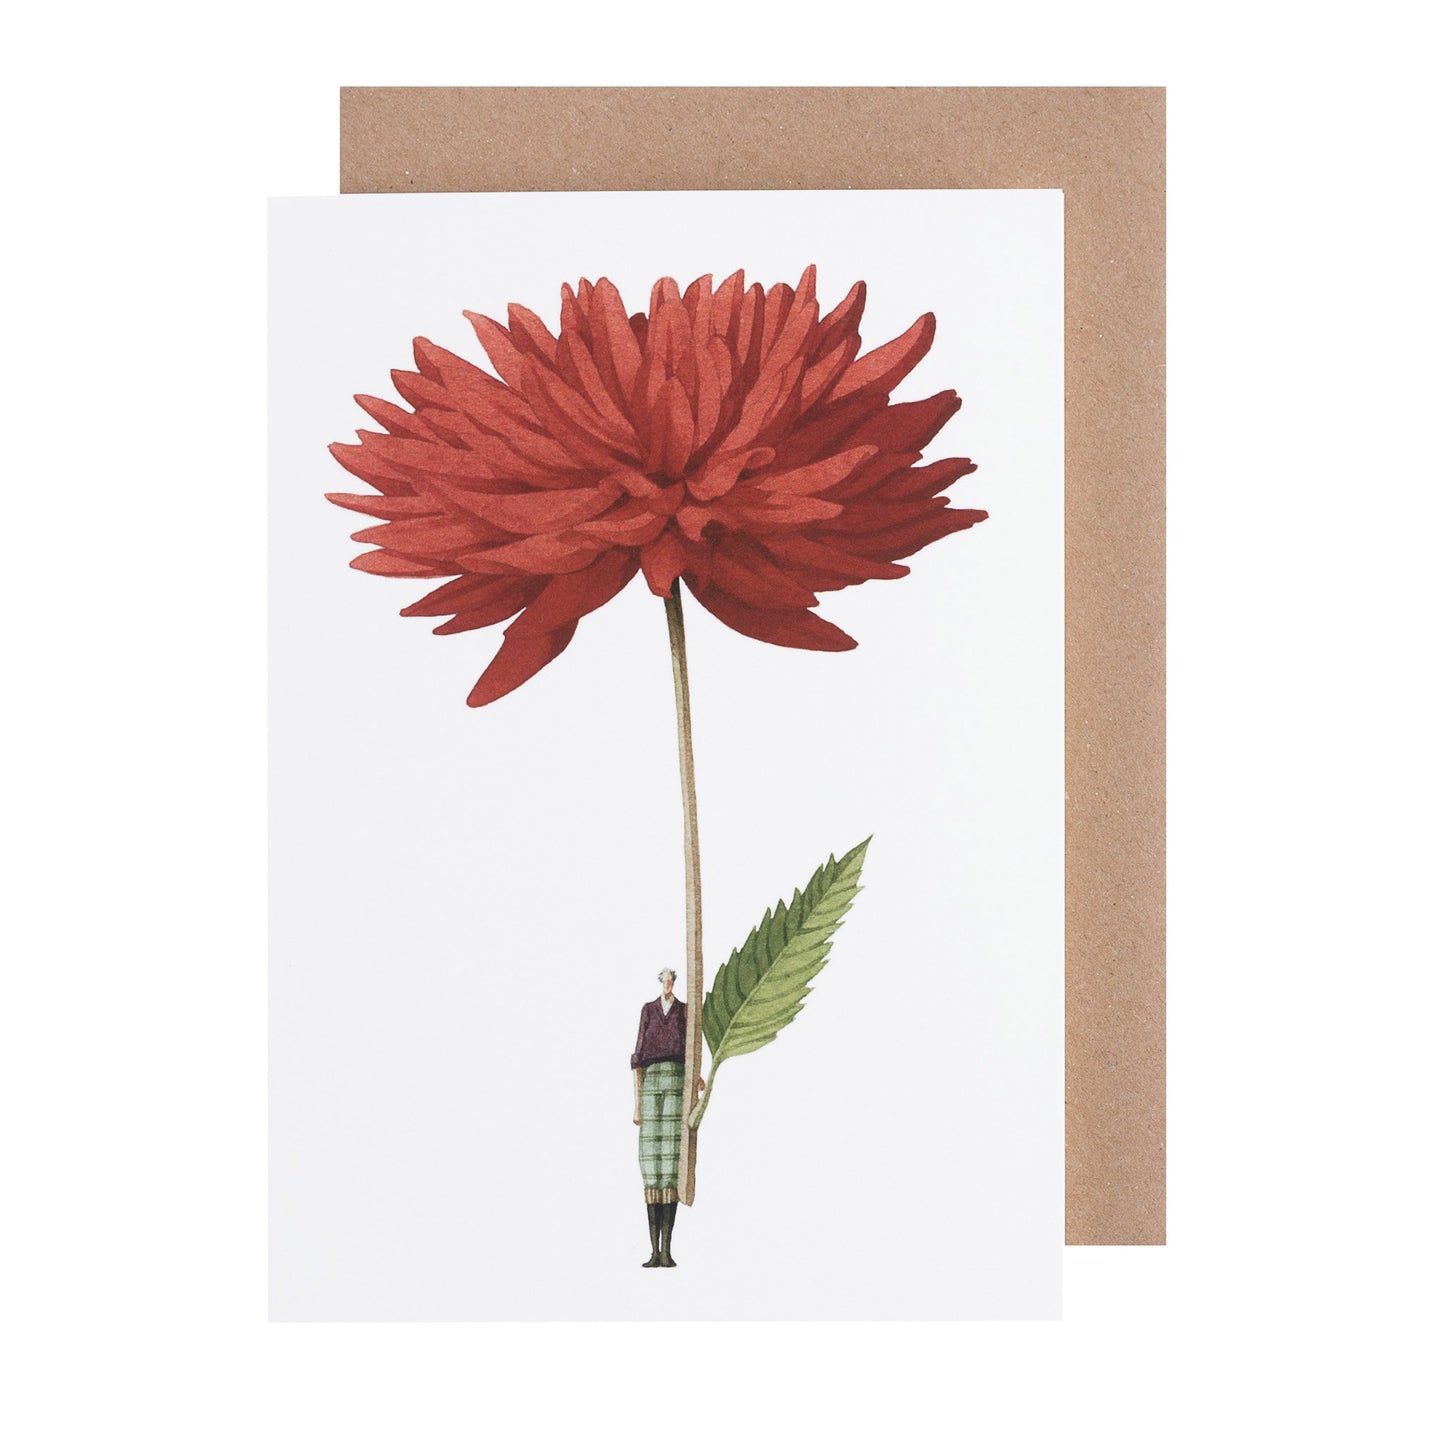 environmentally sustainable paper, compostable packaging, recycled paper, made in england, illustration, dahlia, flowers